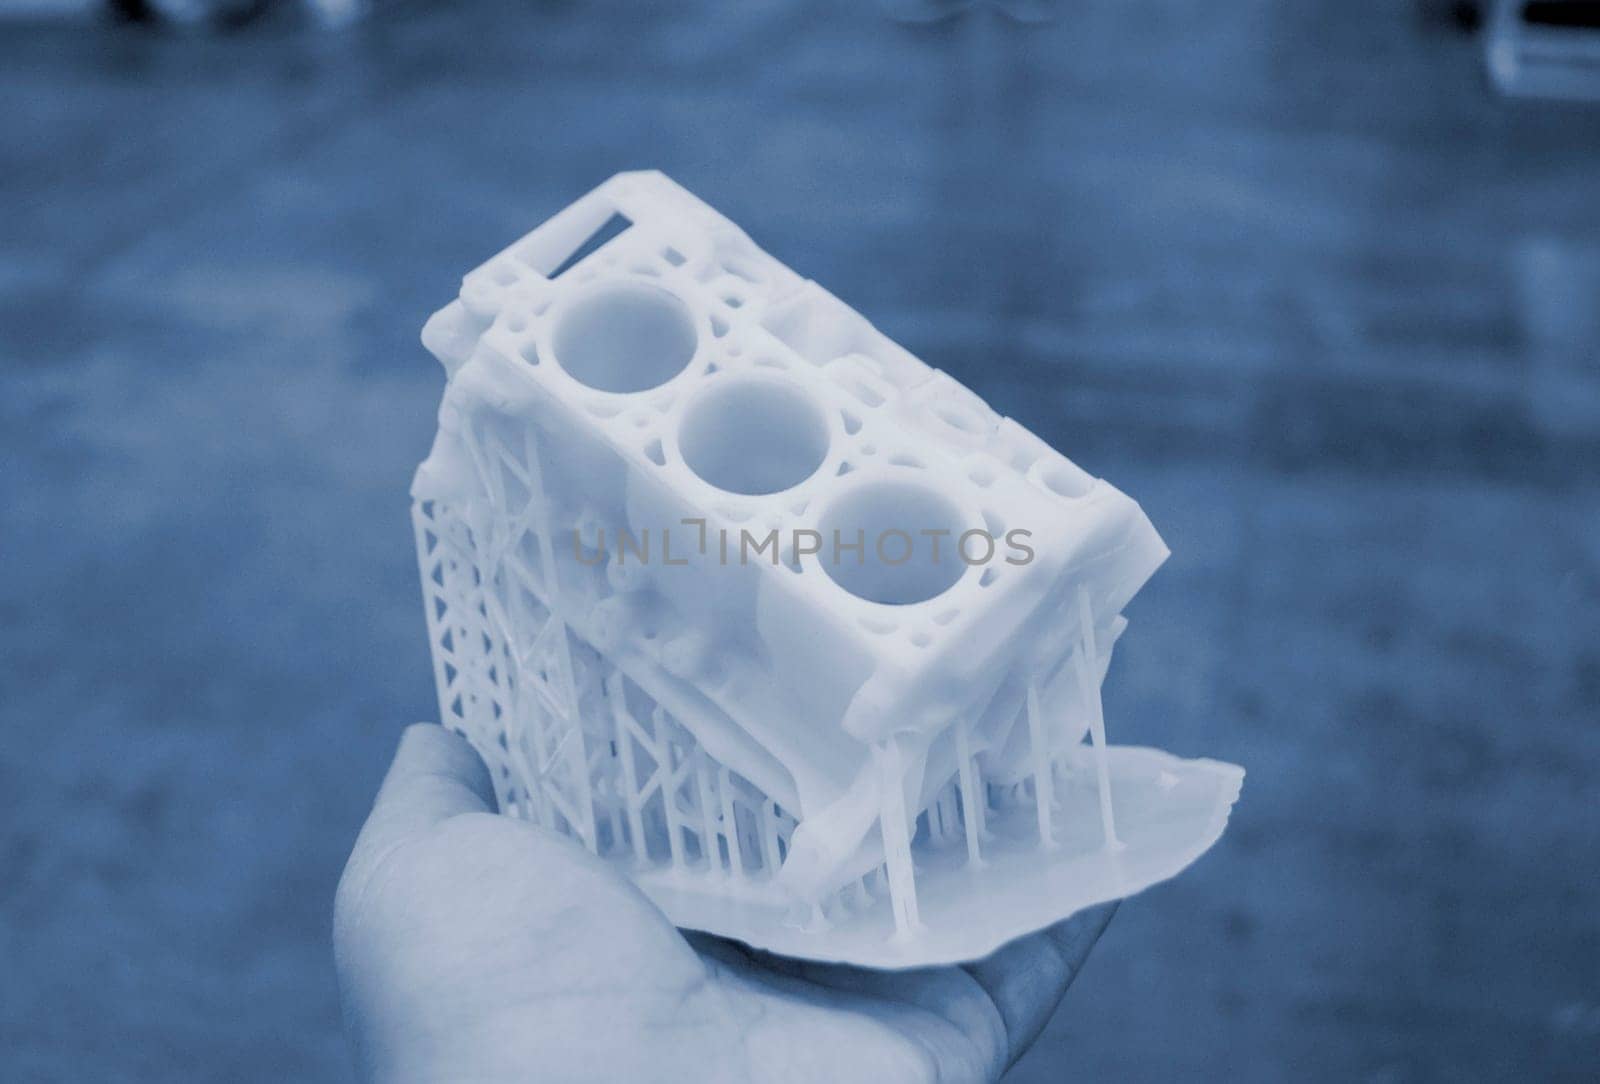 Detailed models in form of internal combustion engine printed on 3D printer from polymer close-up. Detailed object created by 3D printer using 3D printing method. Concept 3D Printing. SLA technology